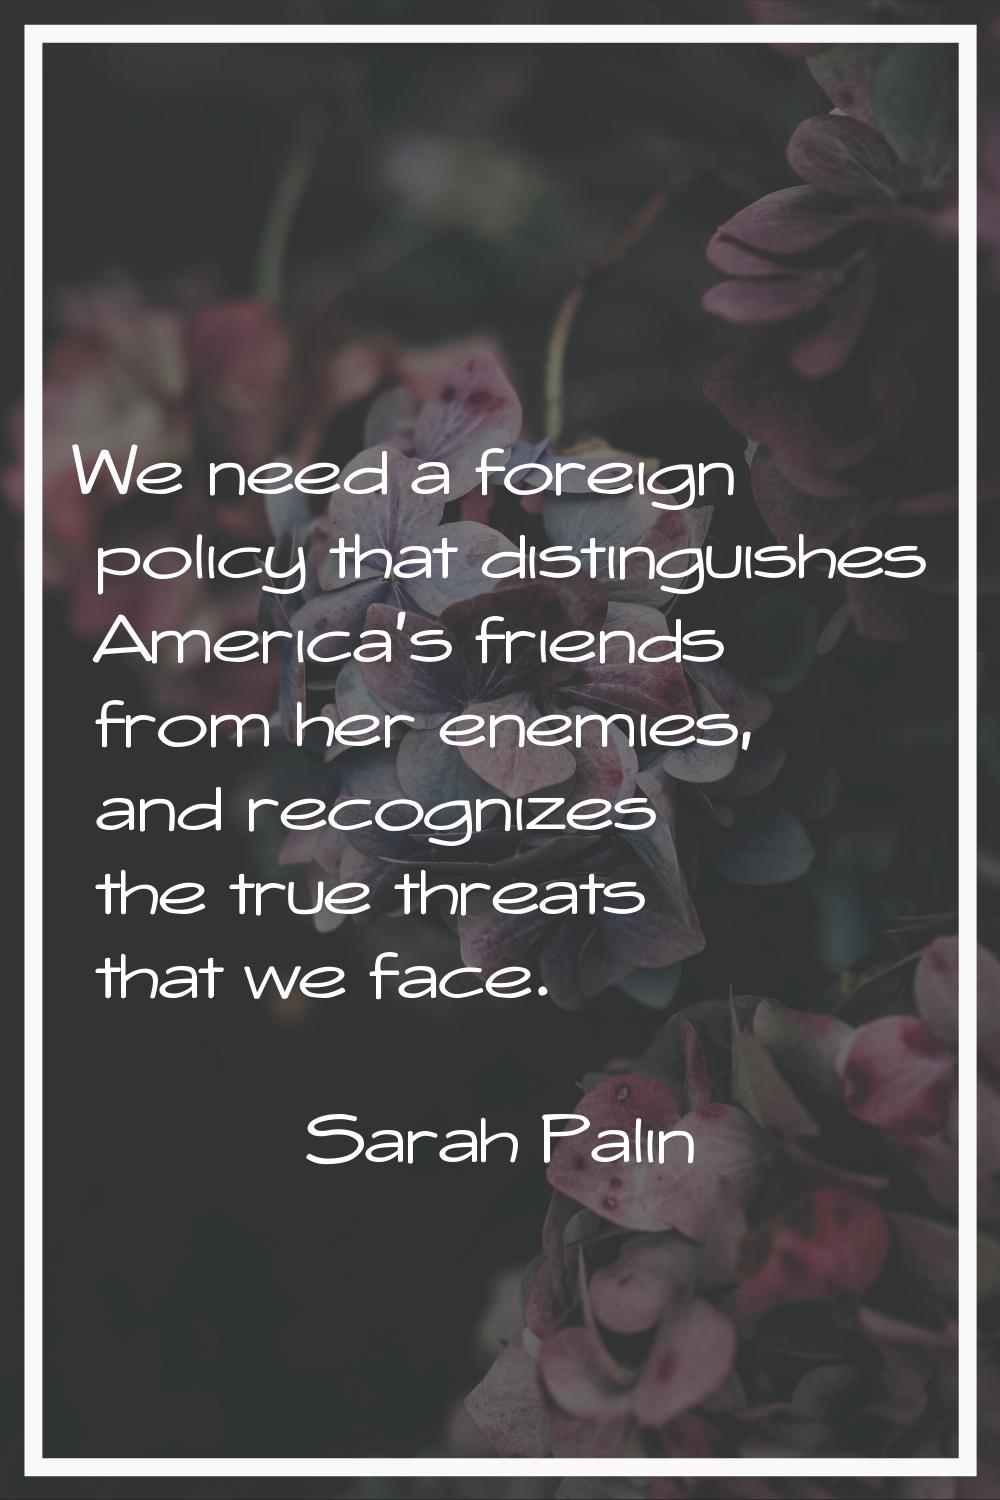 We need a foreign policy that distinguishes America's friends from her enemies, and recognizes the 